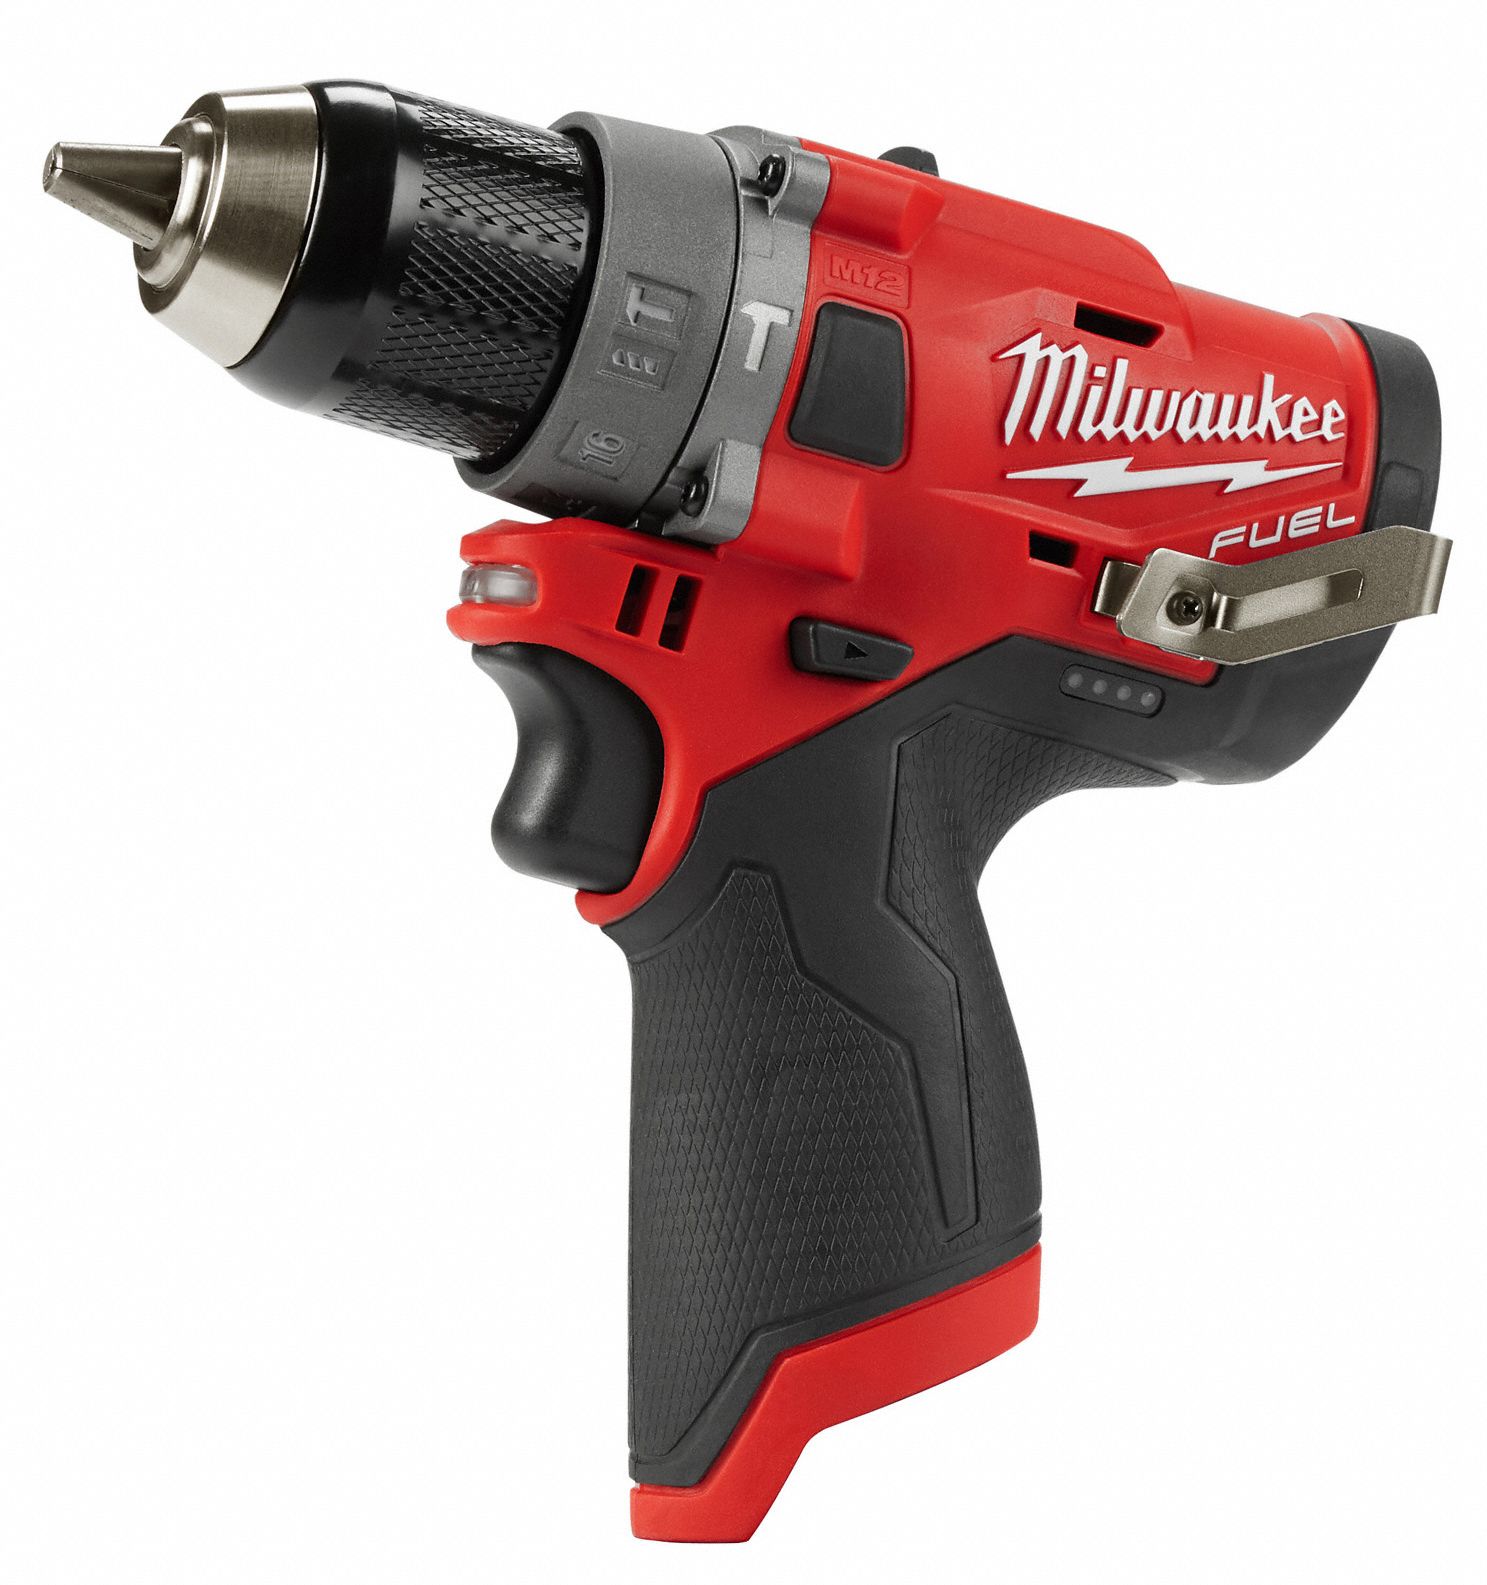 MILWAUKEE Cordless Hammer Drill, 12.0 V, 1/2 in Chuck Size, 0 to 25,500 ...